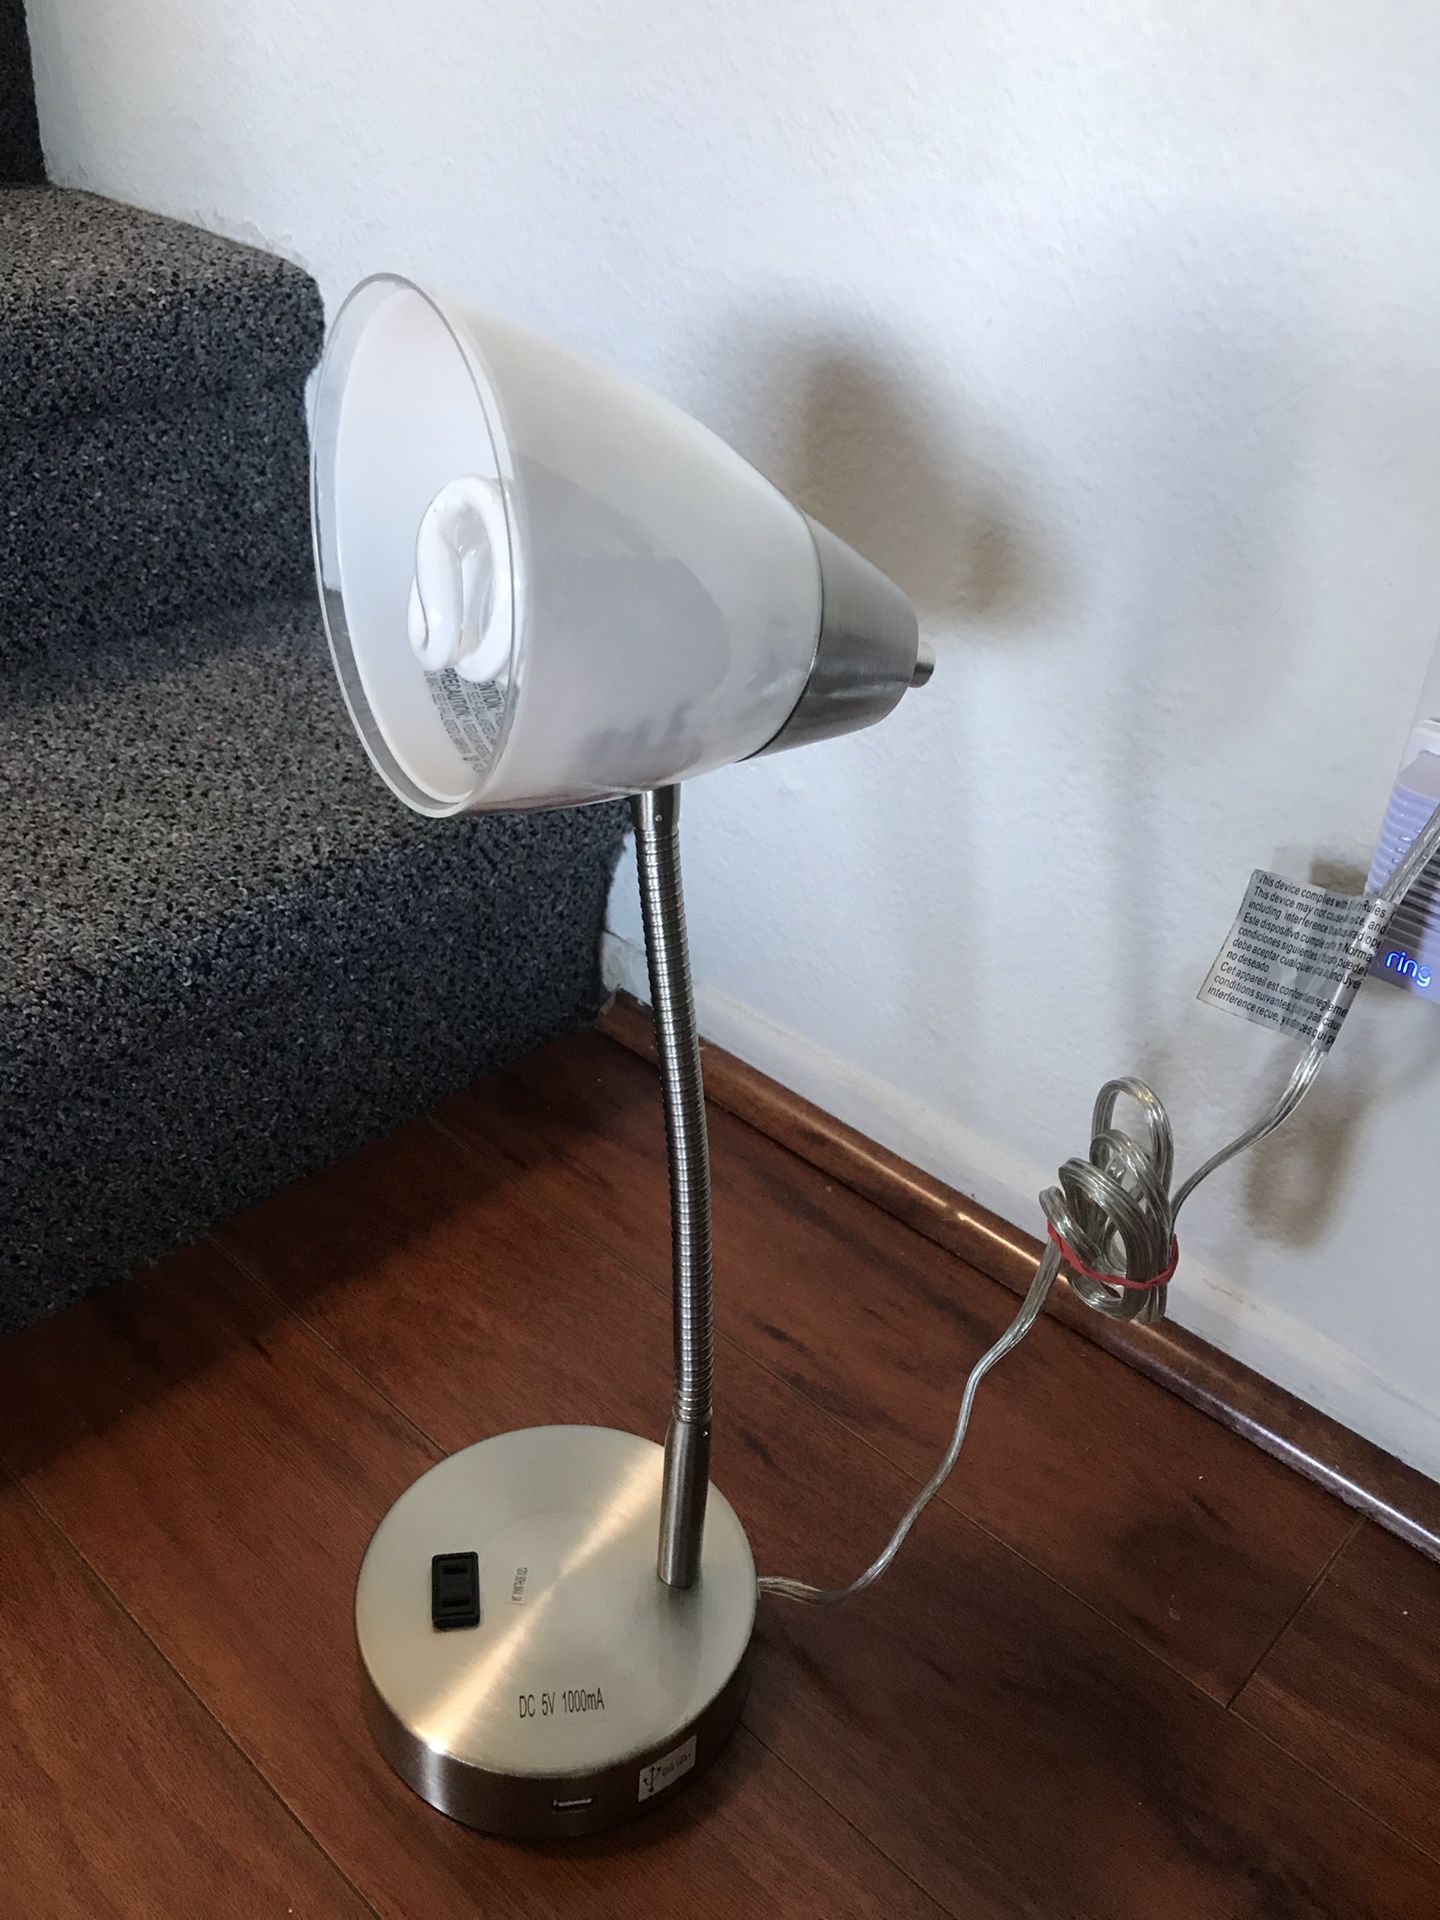 Silver Desk Lamp with power and usb outlet